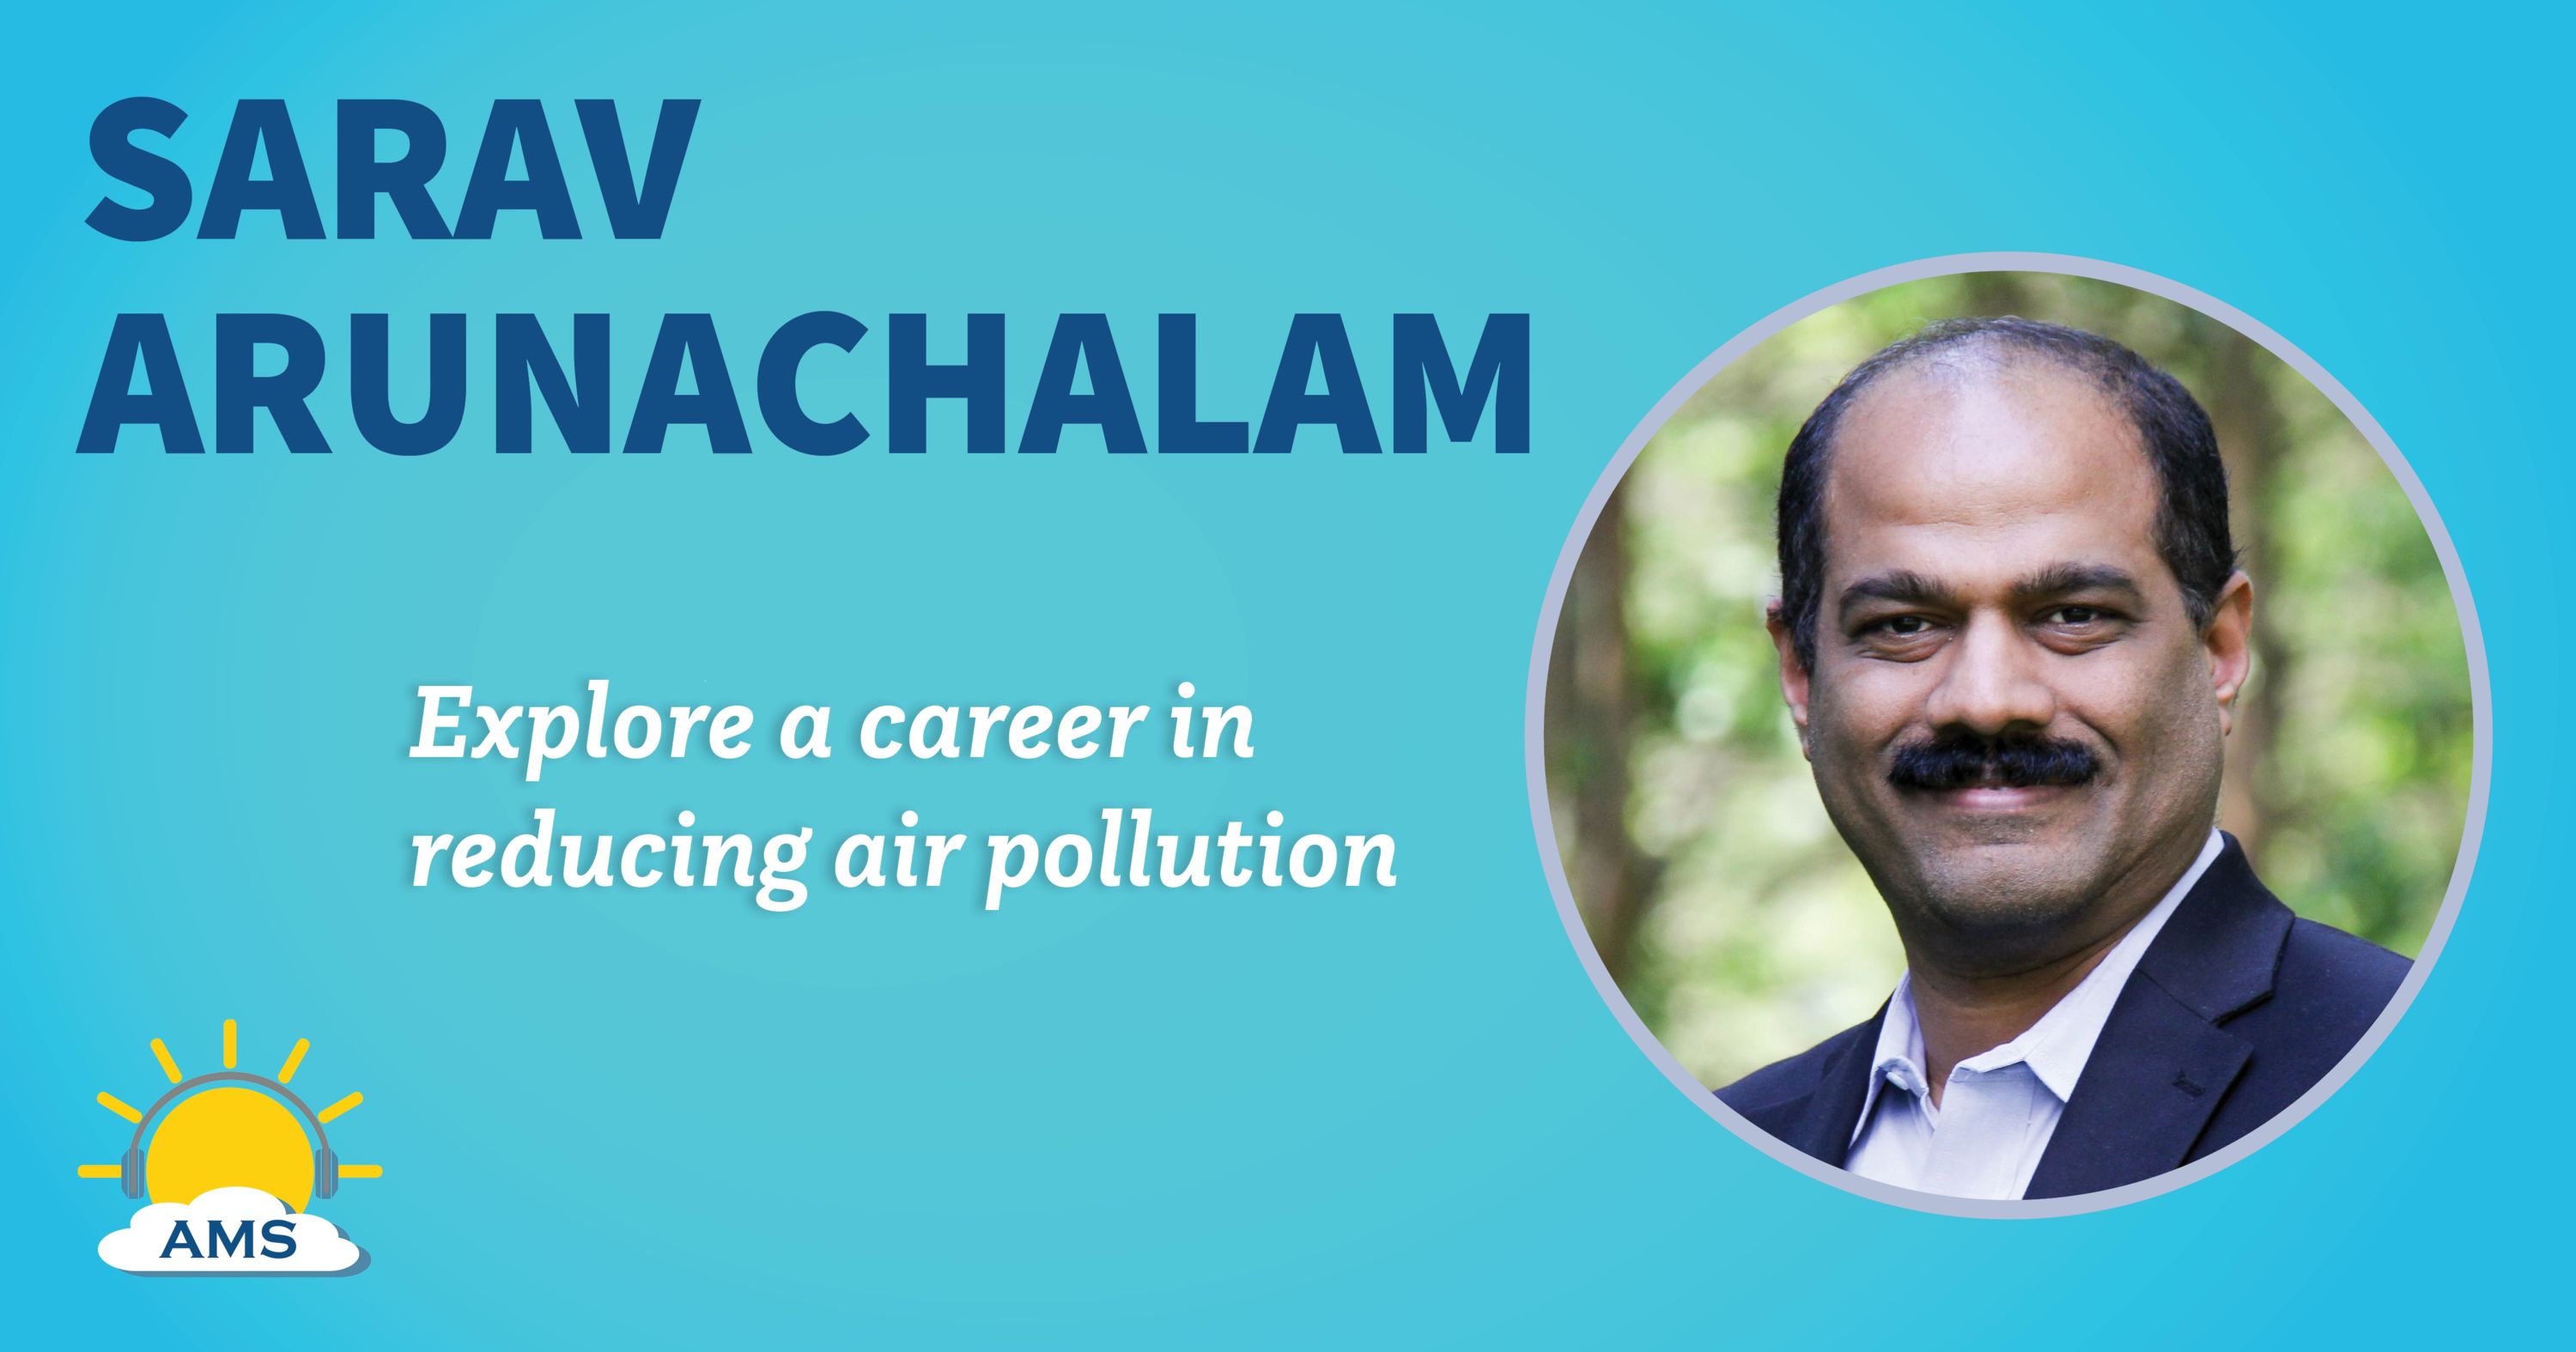 sarav arunachalam headshot graphic with teaser text that reads &quotexplore a career in reducing air pollution"